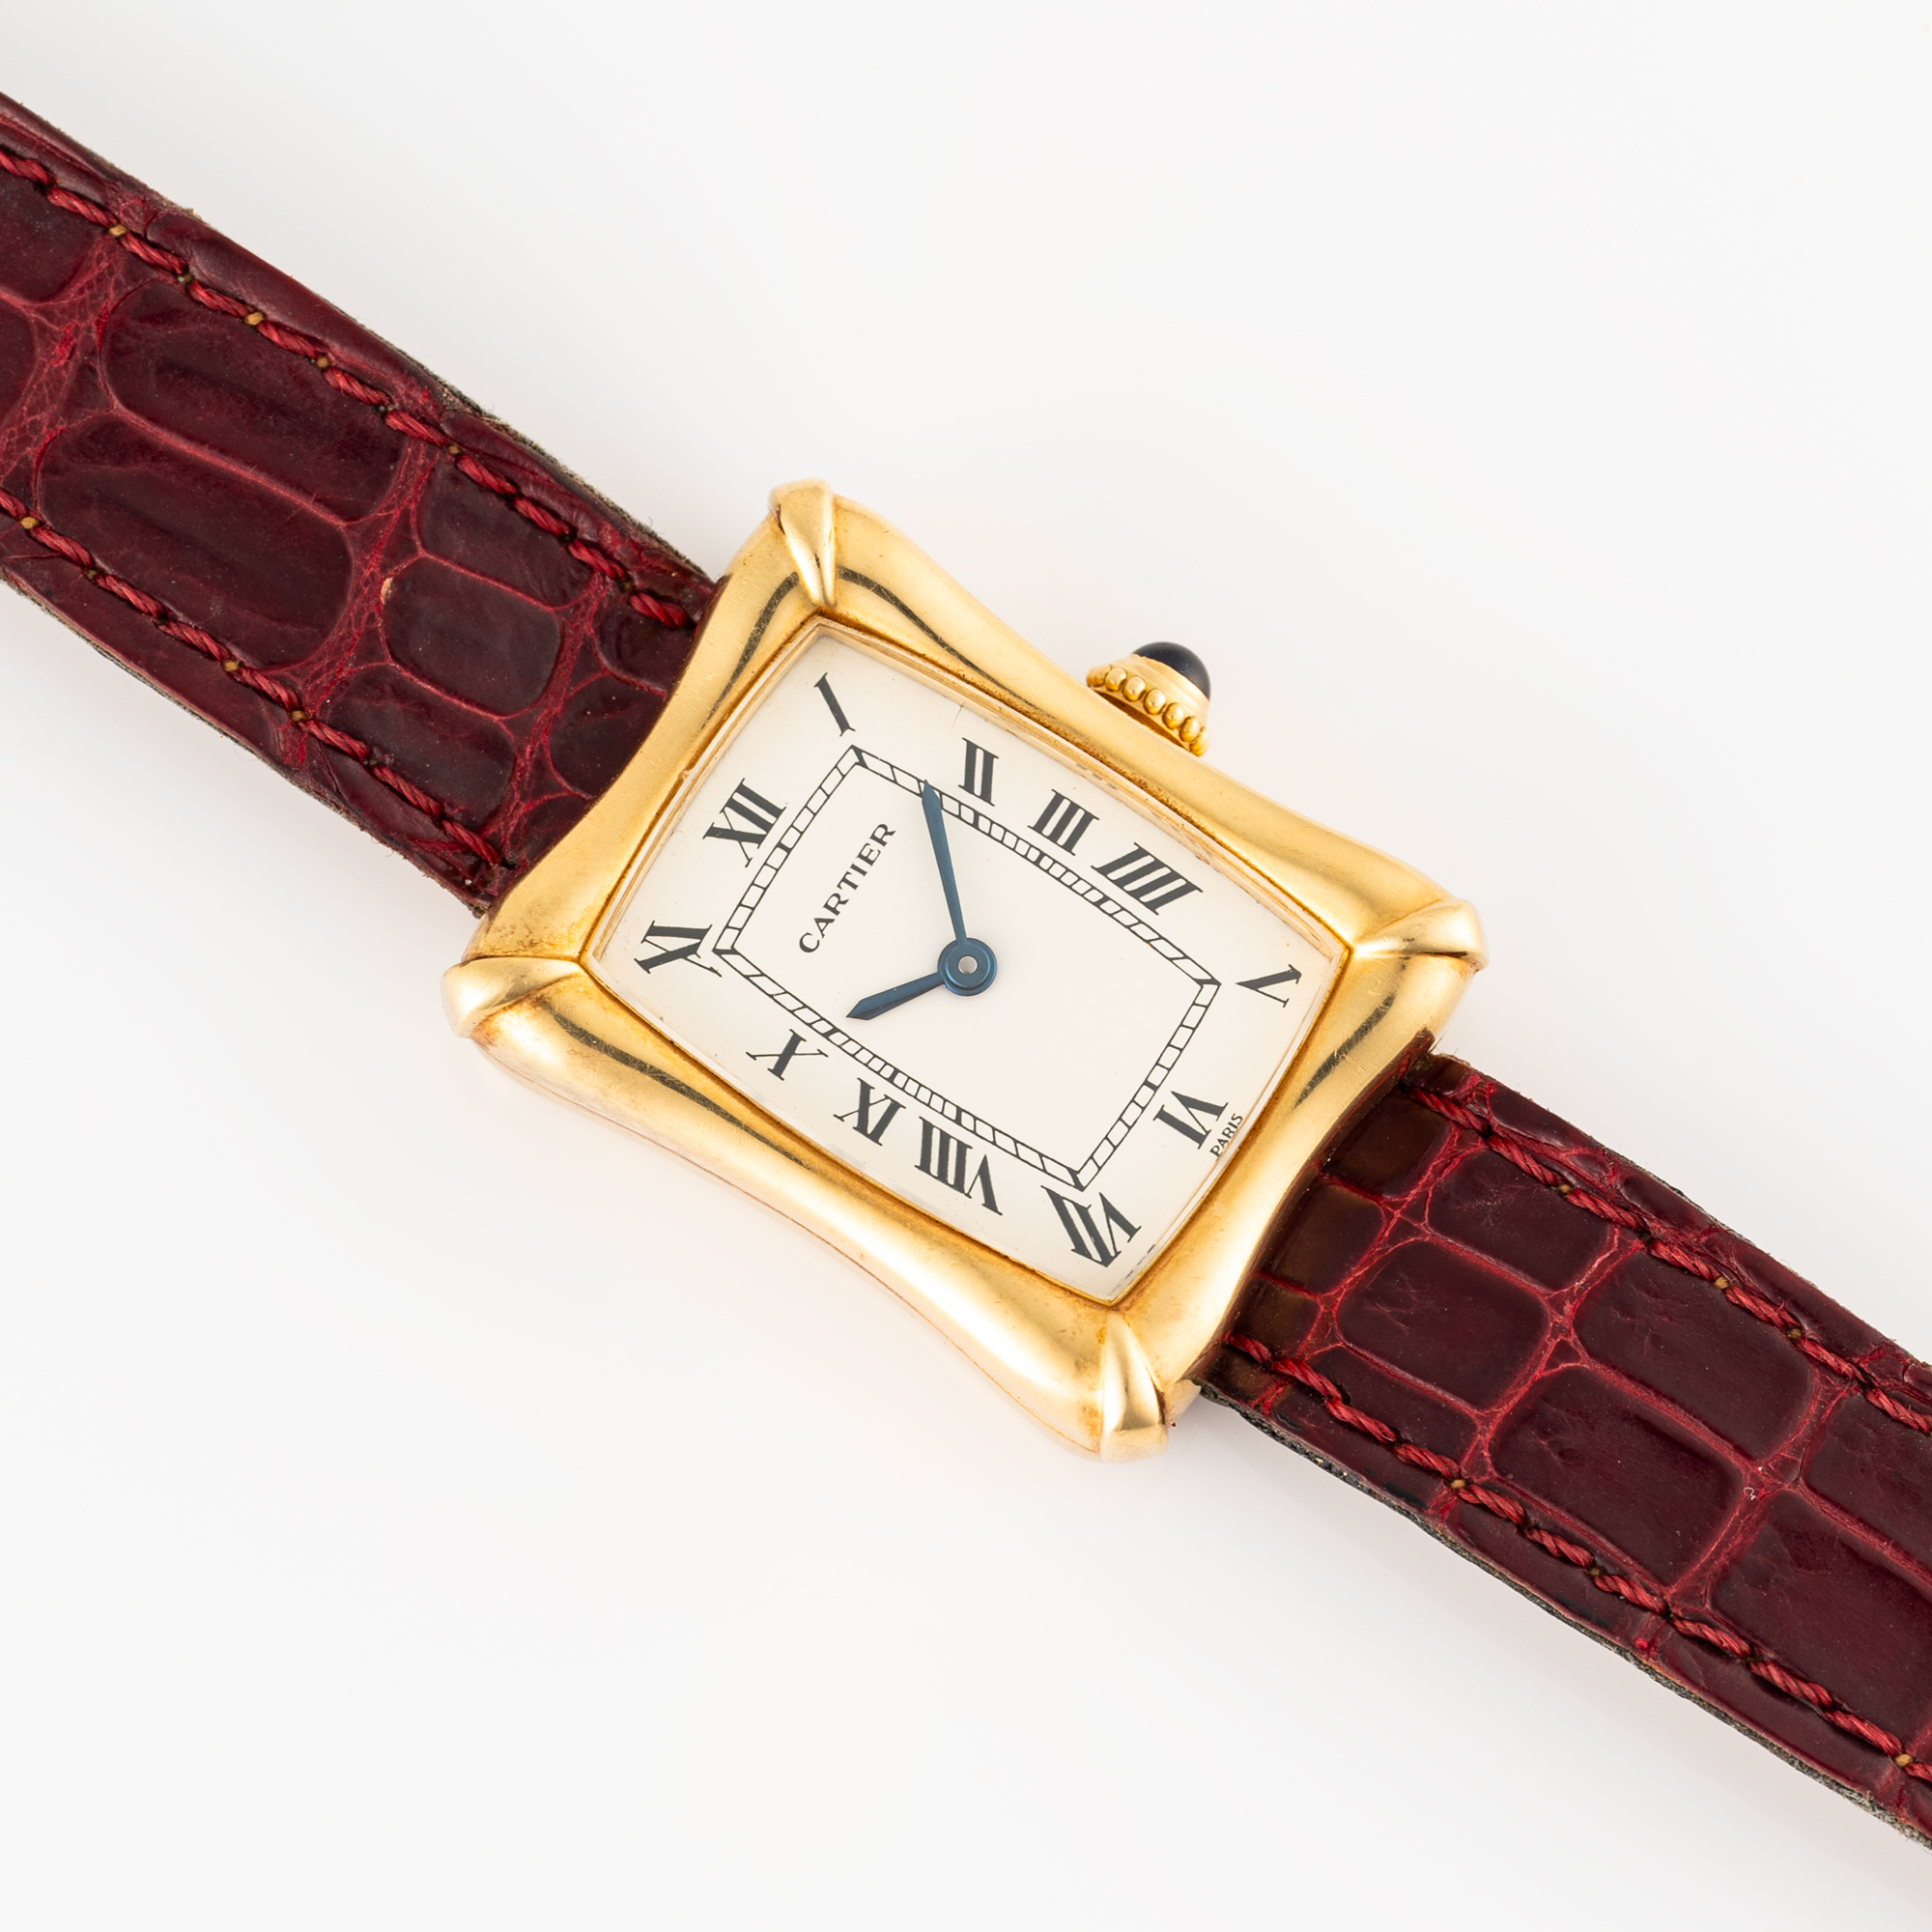 A VERY RARE LADY'S 18K SOLID GOLD CARTIER PARIS BAMBOO COUSSIN WRIST WATCH CIRCA 1970s, REF. 78110 - Image 3 of 10